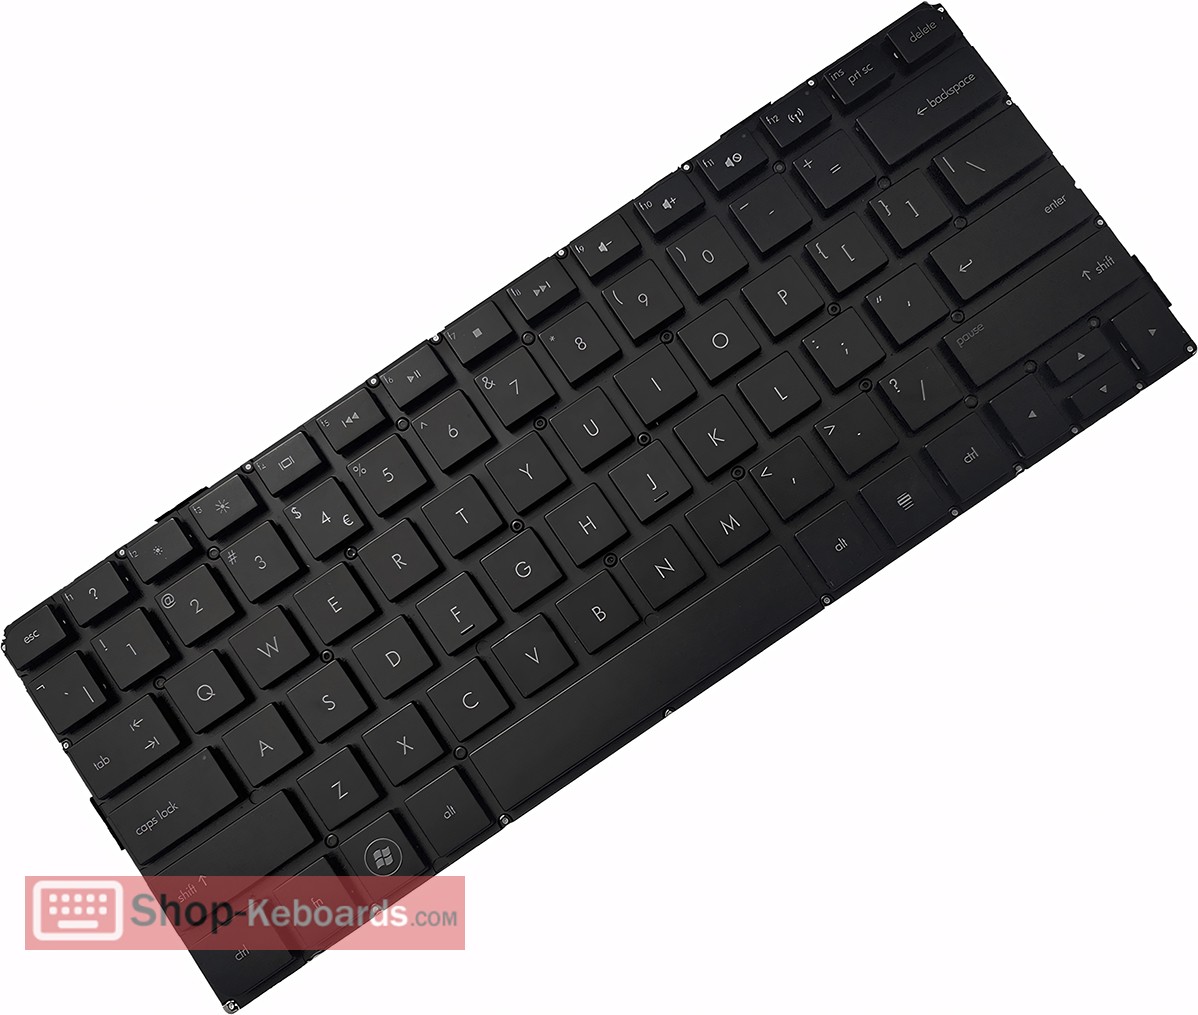 HP Envy 13-1000 SERIES Keyboard replacement